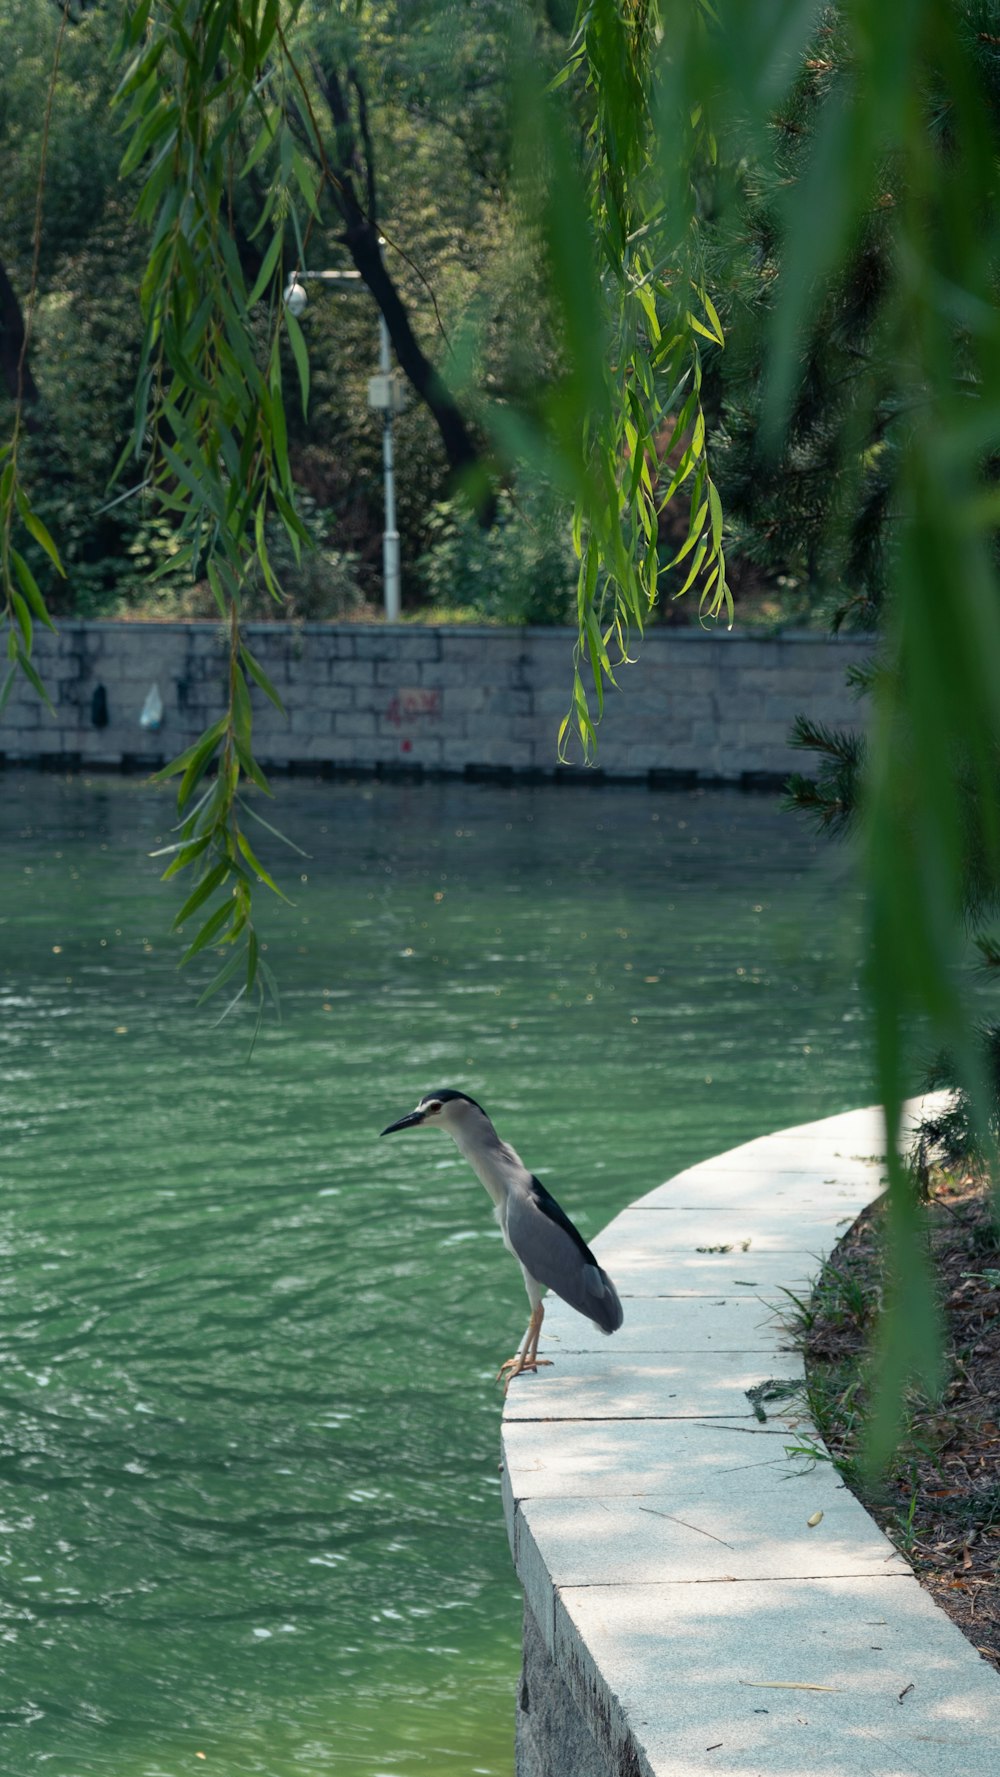 a bird standing on a ledge near a body of water